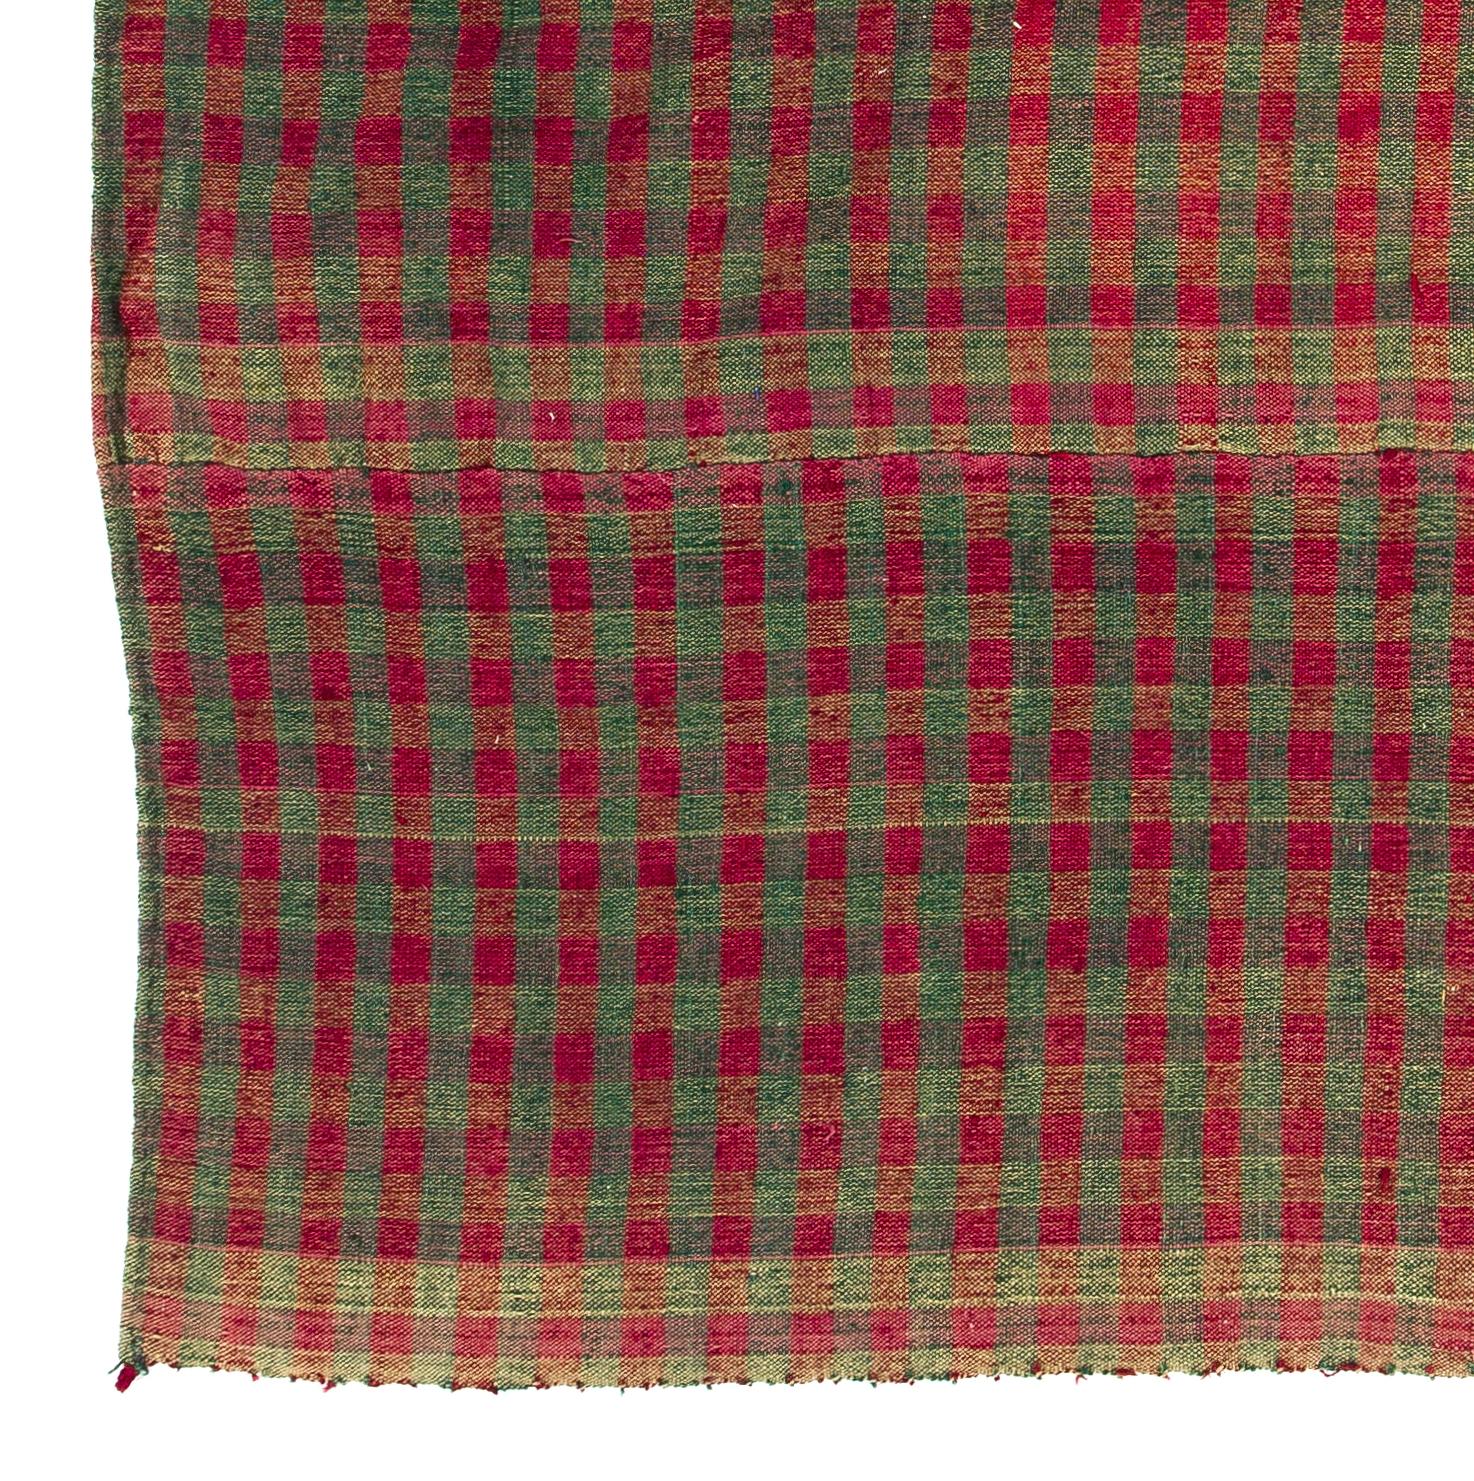 Hand-Woven 4.4x5 Ft Chequered Wool Kilim Rug in Red & Green Colors. Soft Floppy Handle. 